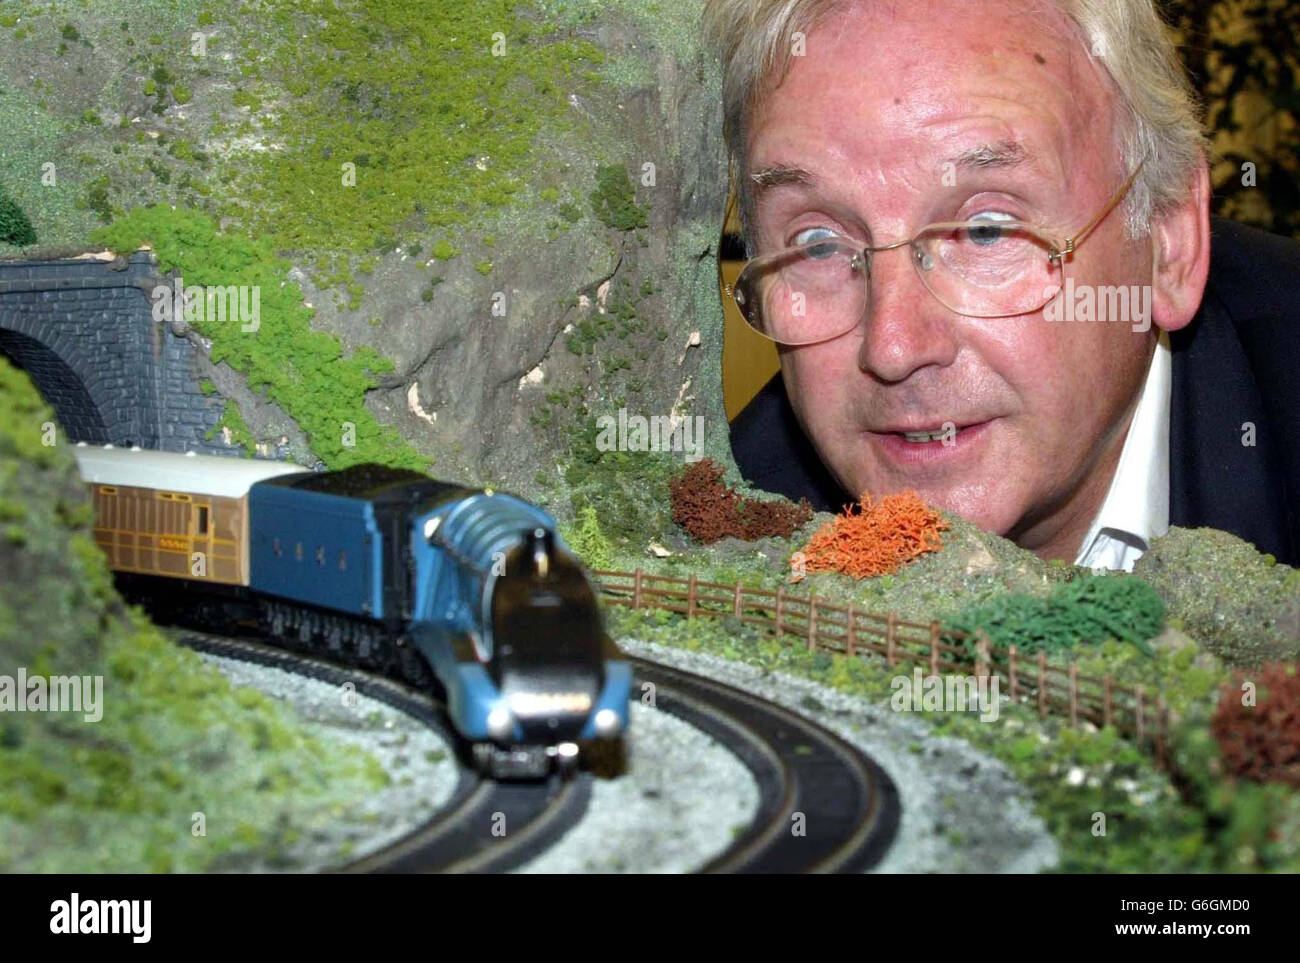 Railway enthusiast and pop impresario Pete Waterman looks on as Hornby launches its first Live Steam Locomotive, the Mallard, part of it's new 'OO' gauge Live Steam working models range at the Goodwood Revival Meeting. Hornby said the first model - the classic A4 Mallard, would be in the shops in time for Christmas. Stock Photo